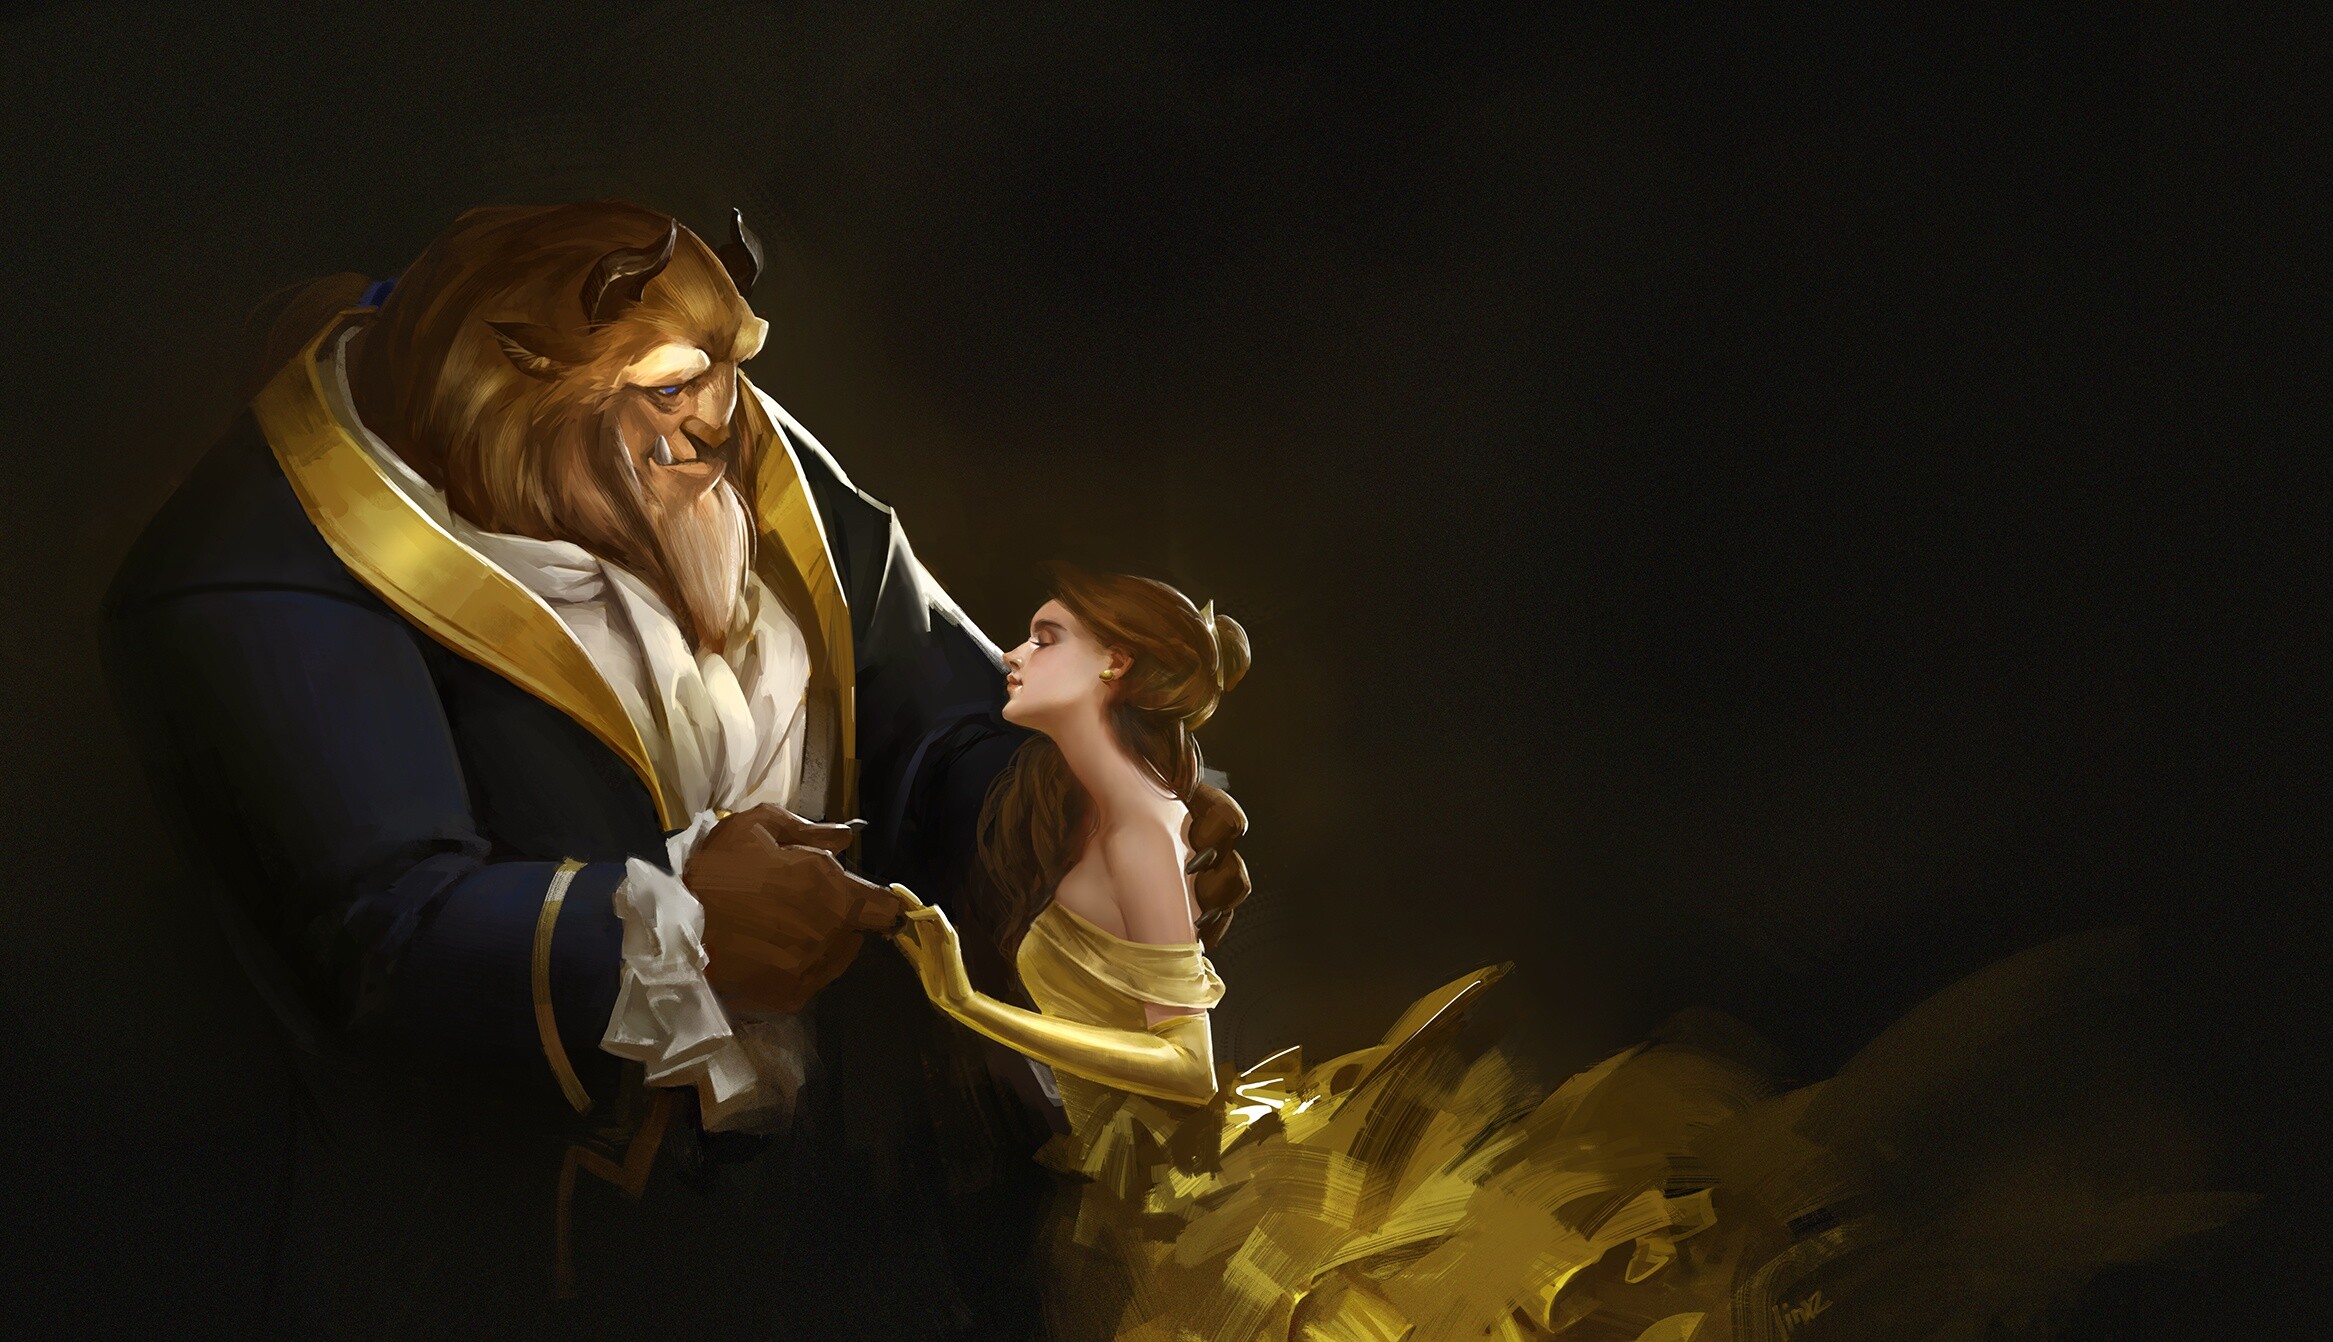 Beauty and the Beast: The story of a prince who is transformed into a monster, Fairy tale. 2340x1350 HD Background.